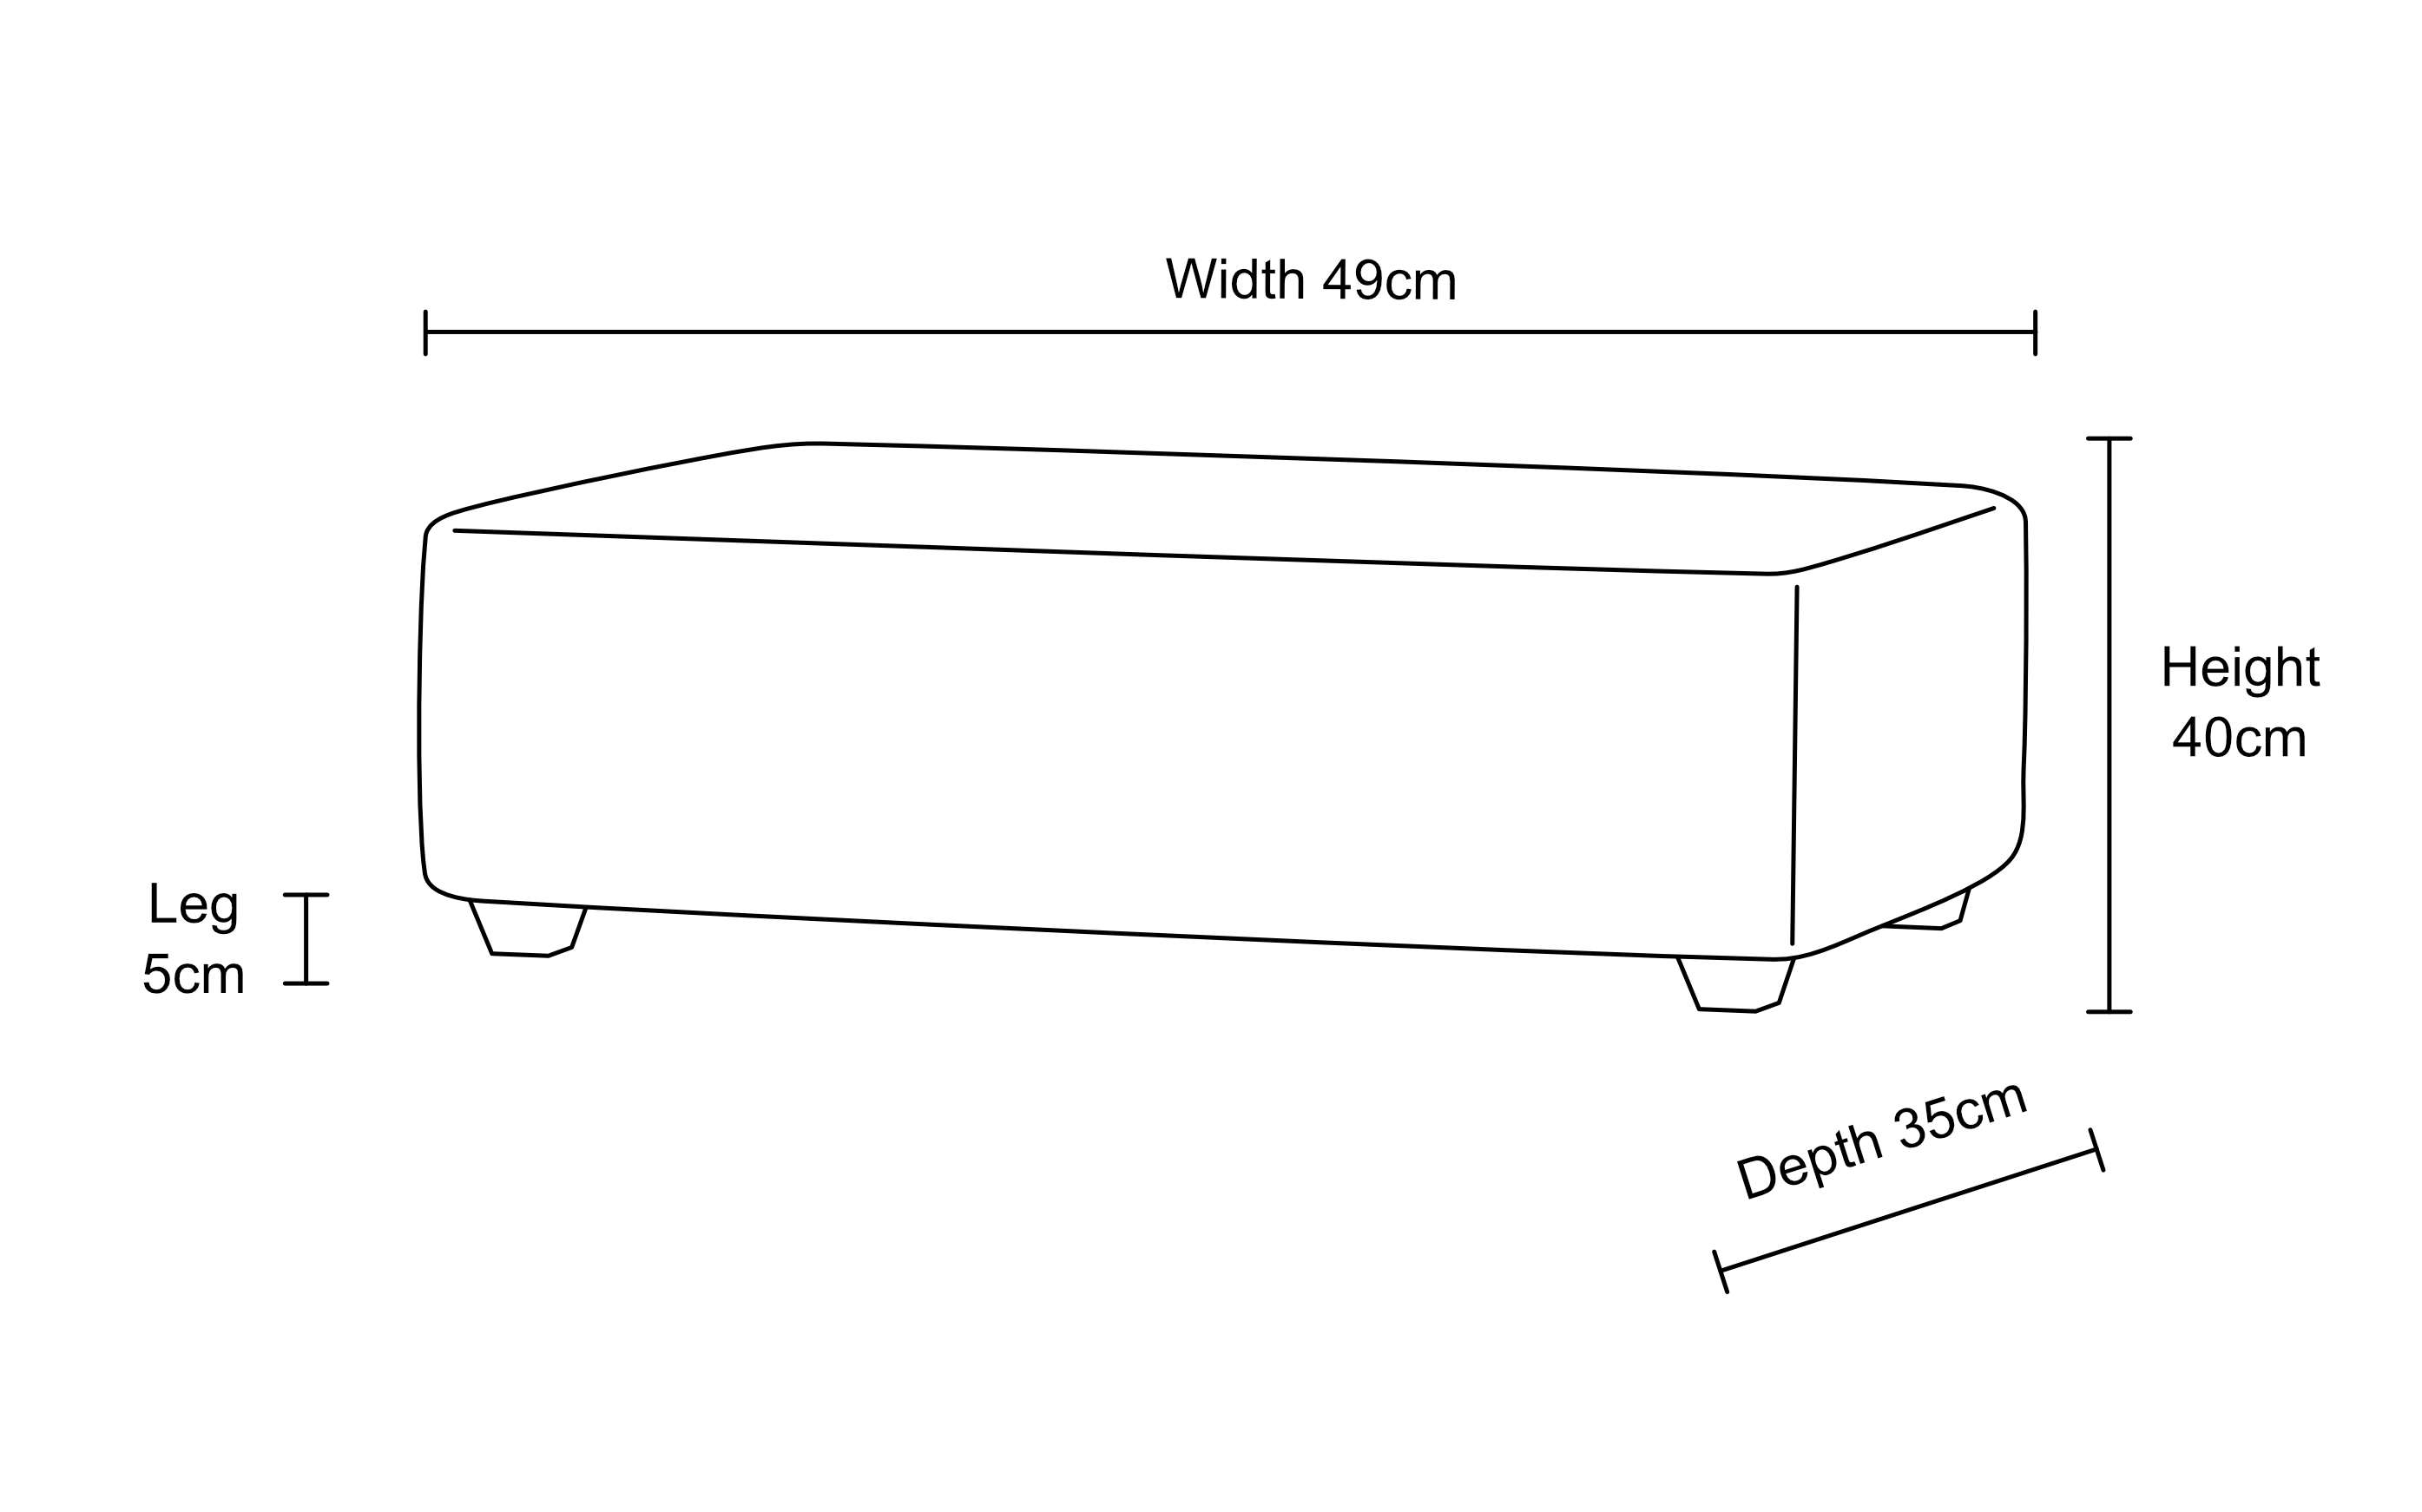 https://www.footstools.co.uk/wp-content/uploads/footstool-coffee-table-19x14-dimensions.jpg